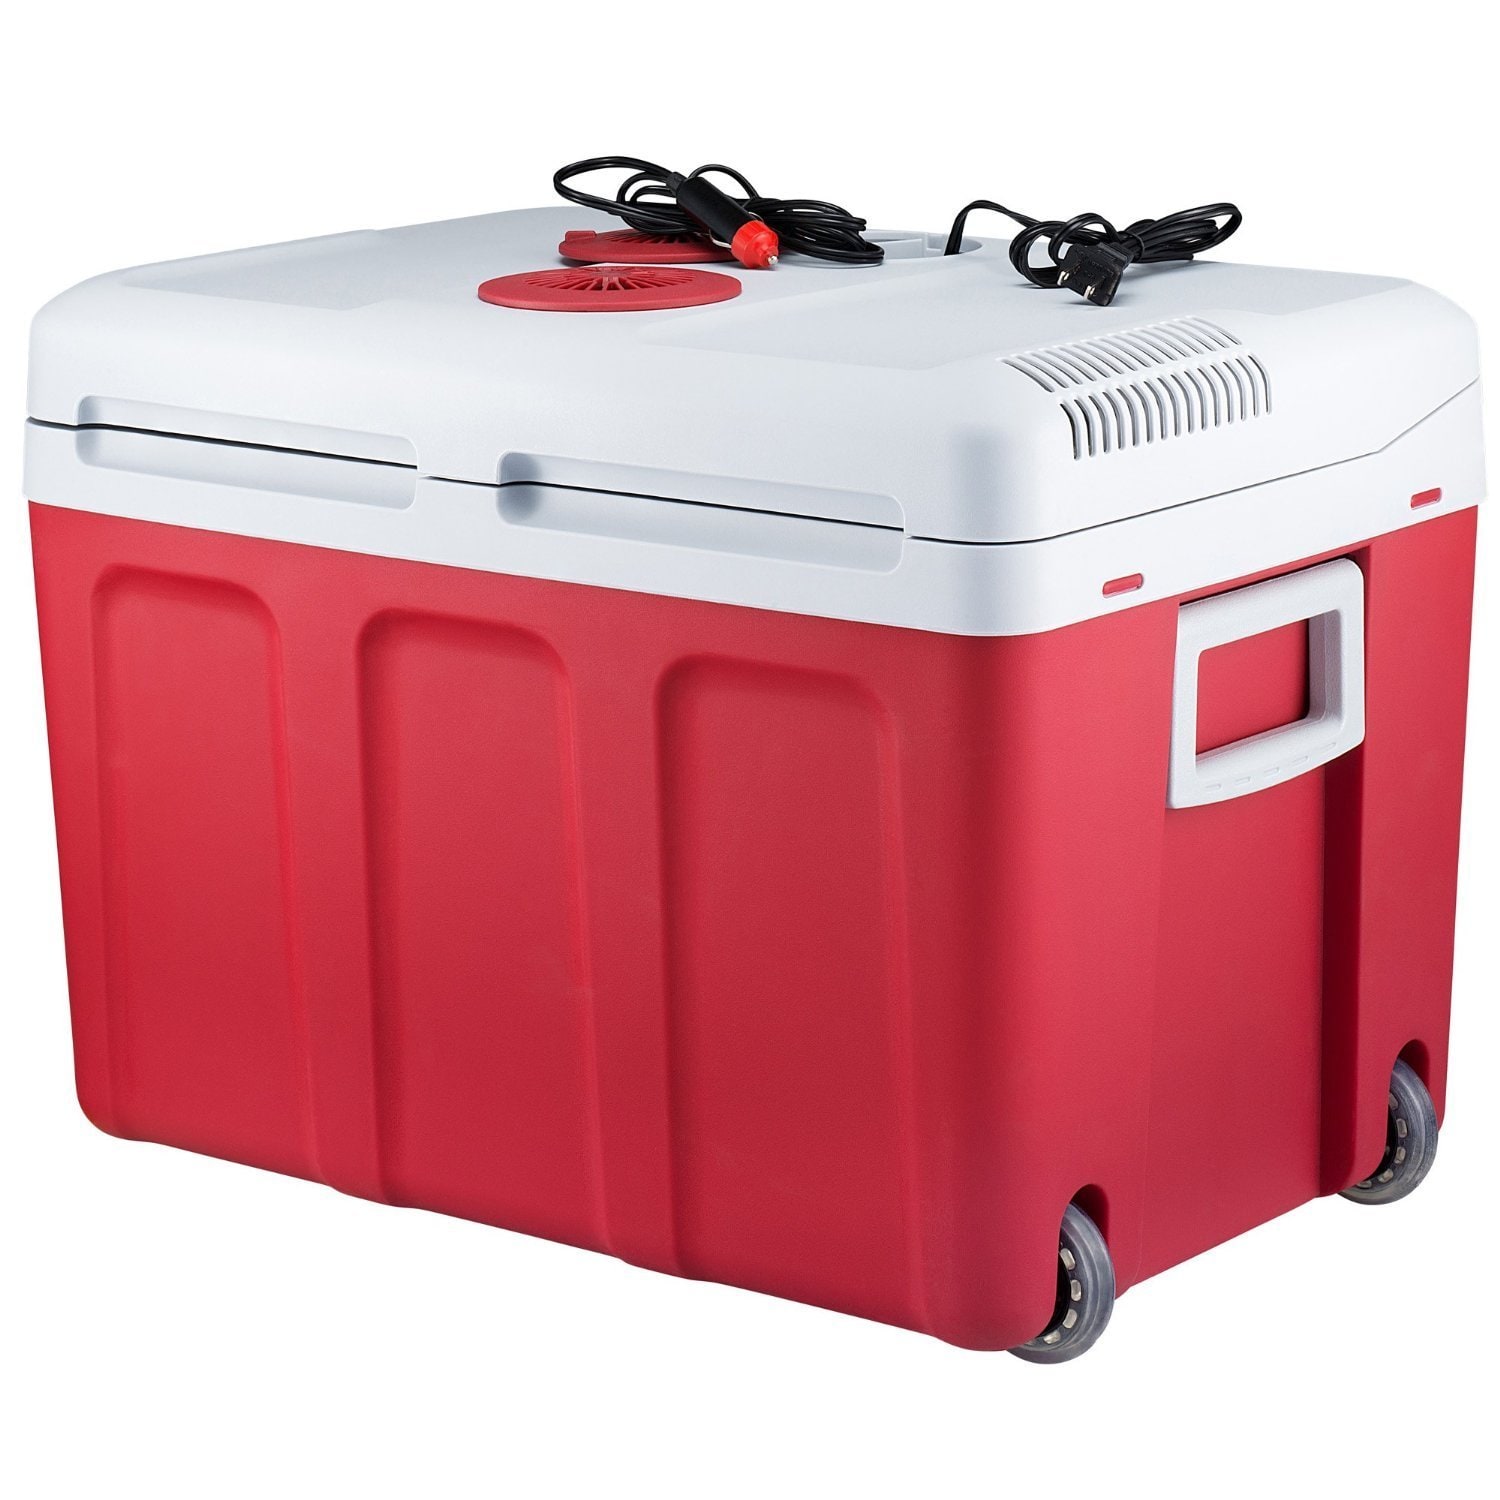 Shop Knox 48Quart Electric Cooler/Warmer with Builtin Car and Home